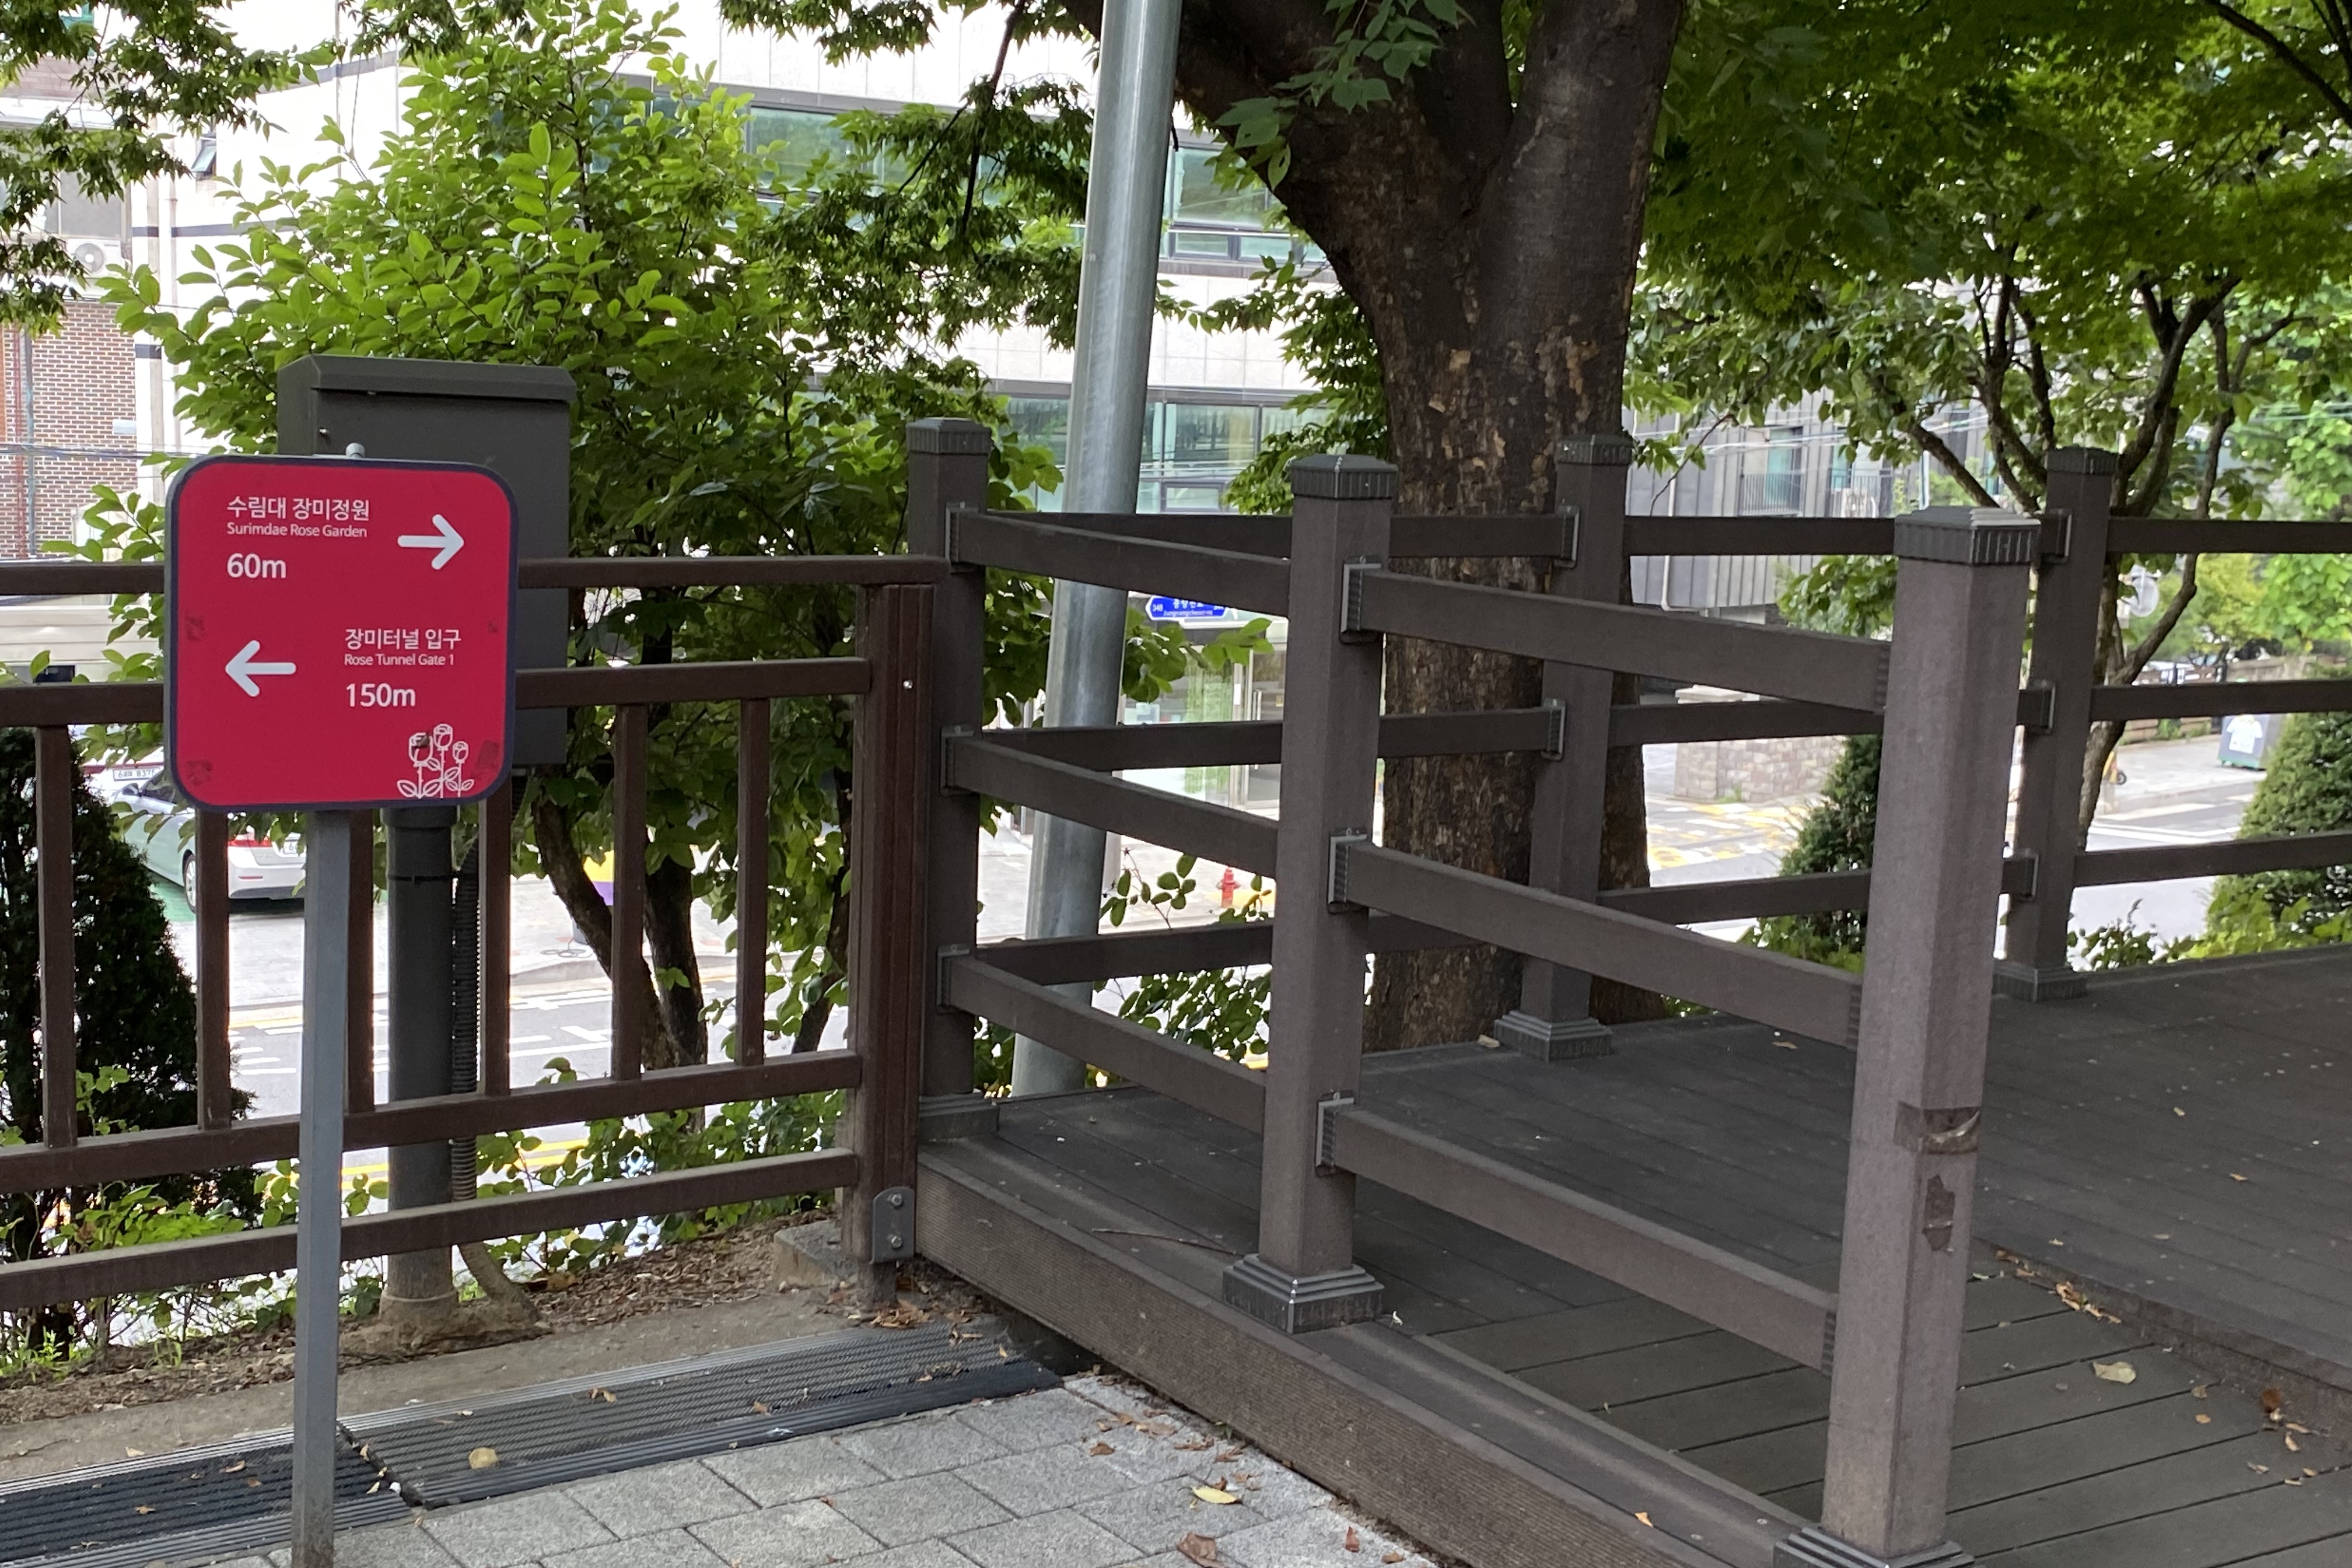 Guide map and information desk0 : Guide map of Seoul Rose Park (Jungnang Rose Park) 1